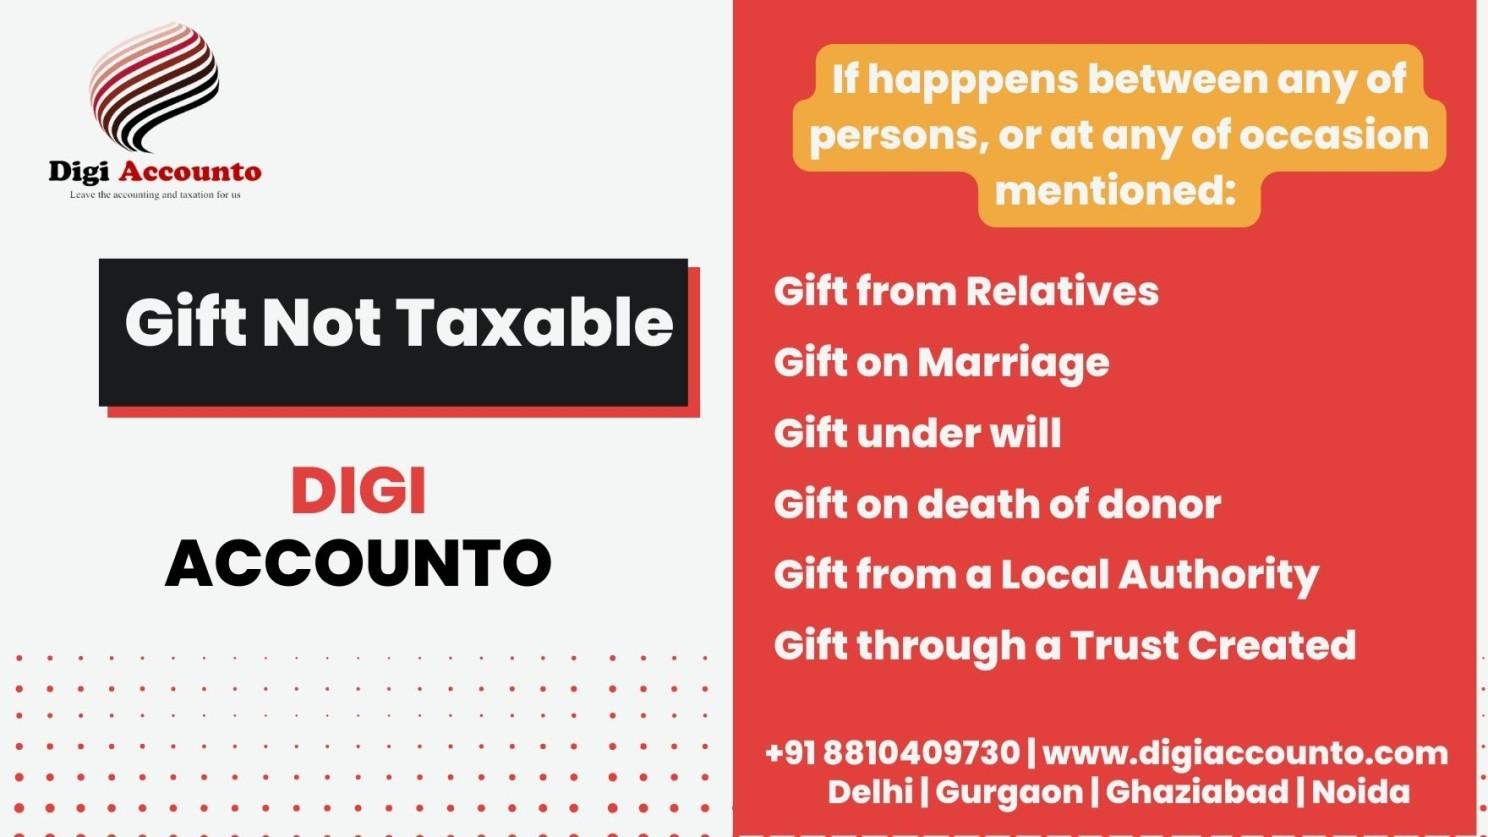 FAQ / Draft of gift deed, List of Relatives for Tax free Gift